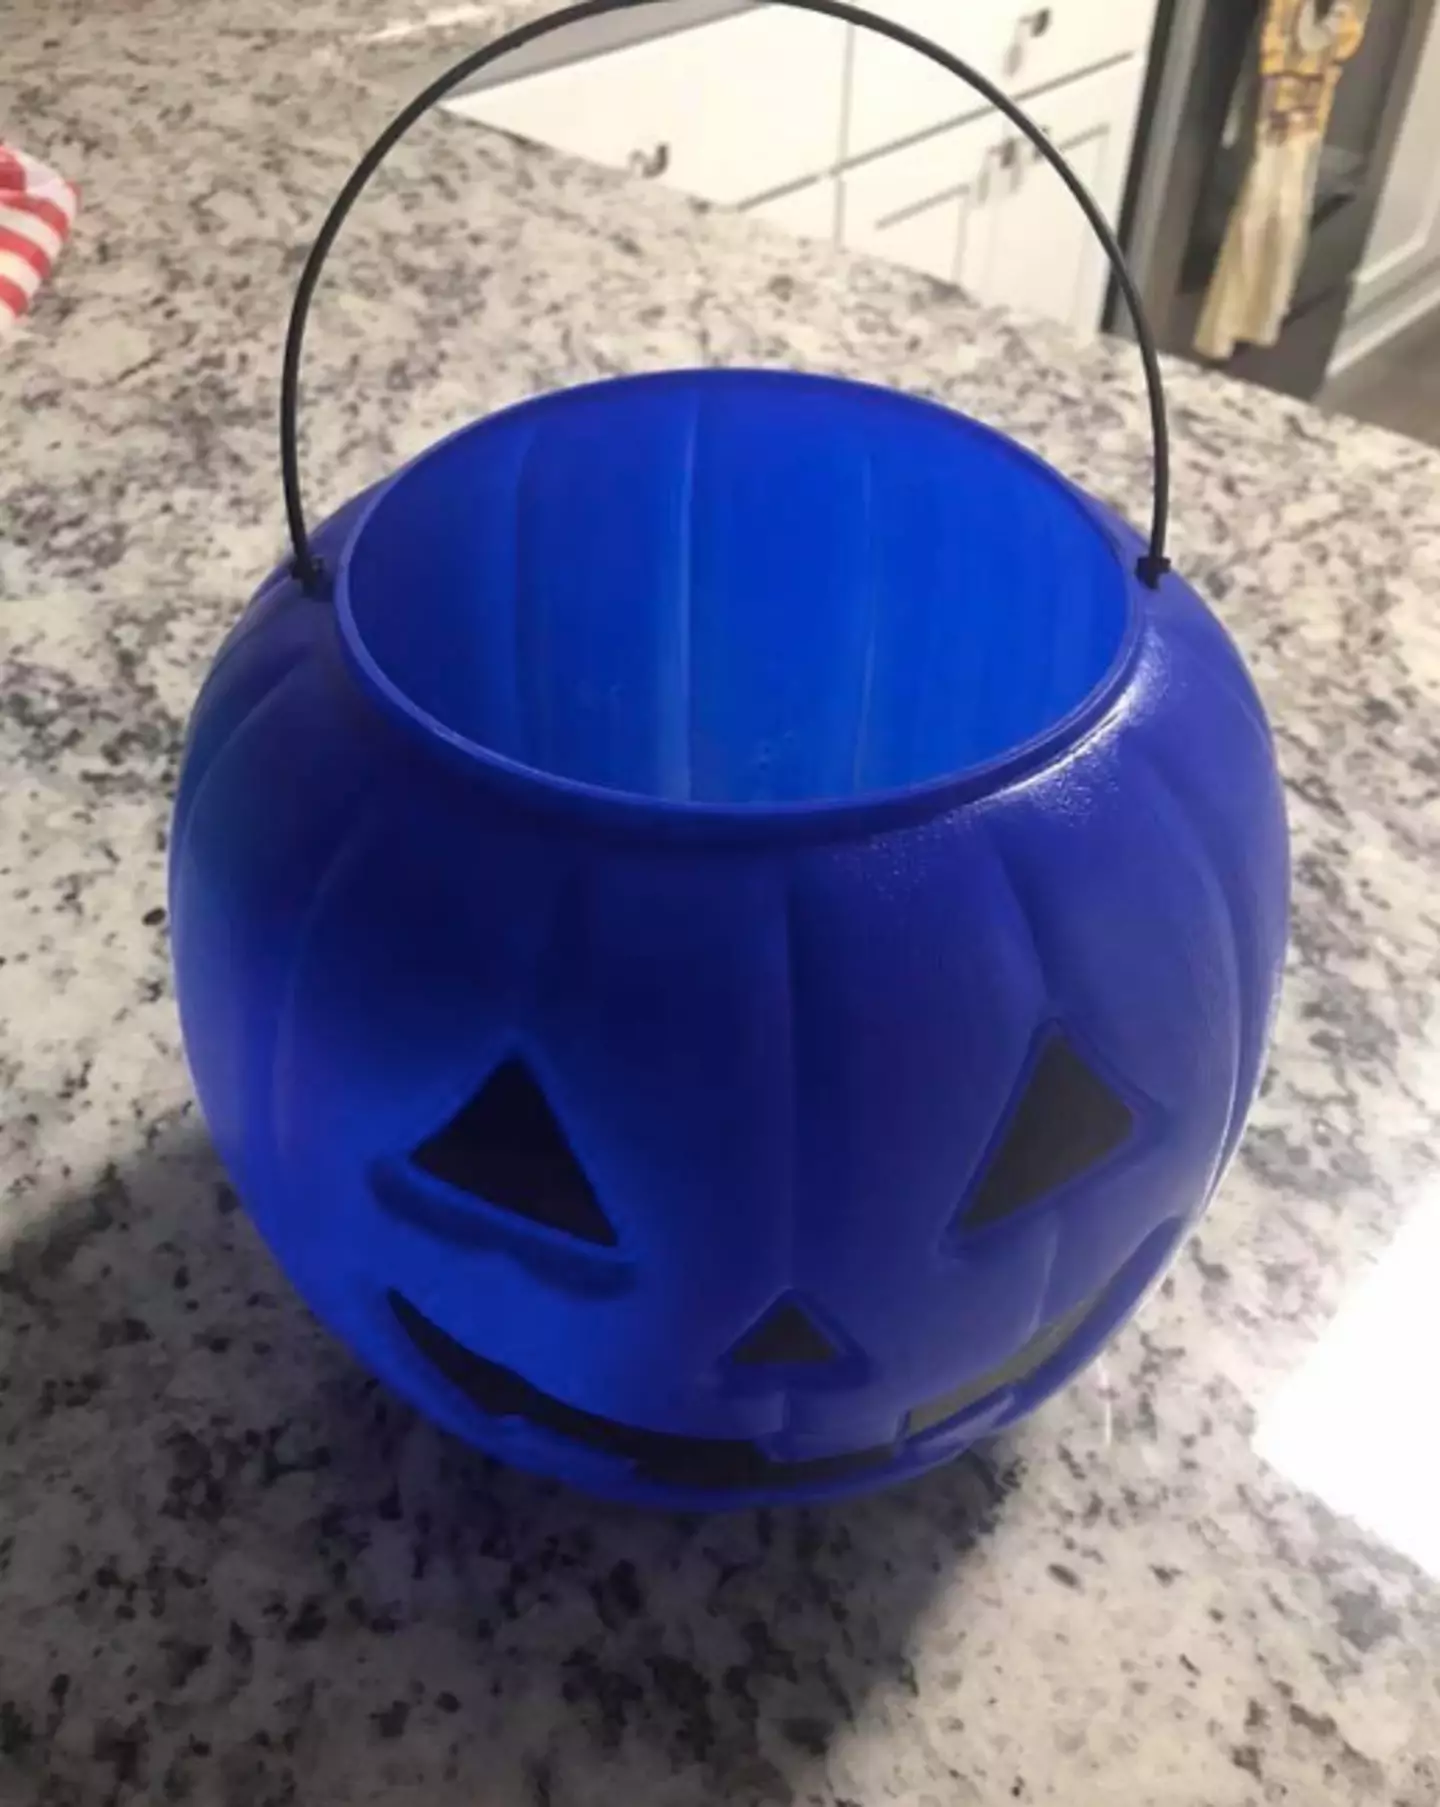 The blue bucket could be an indication the person has autism (